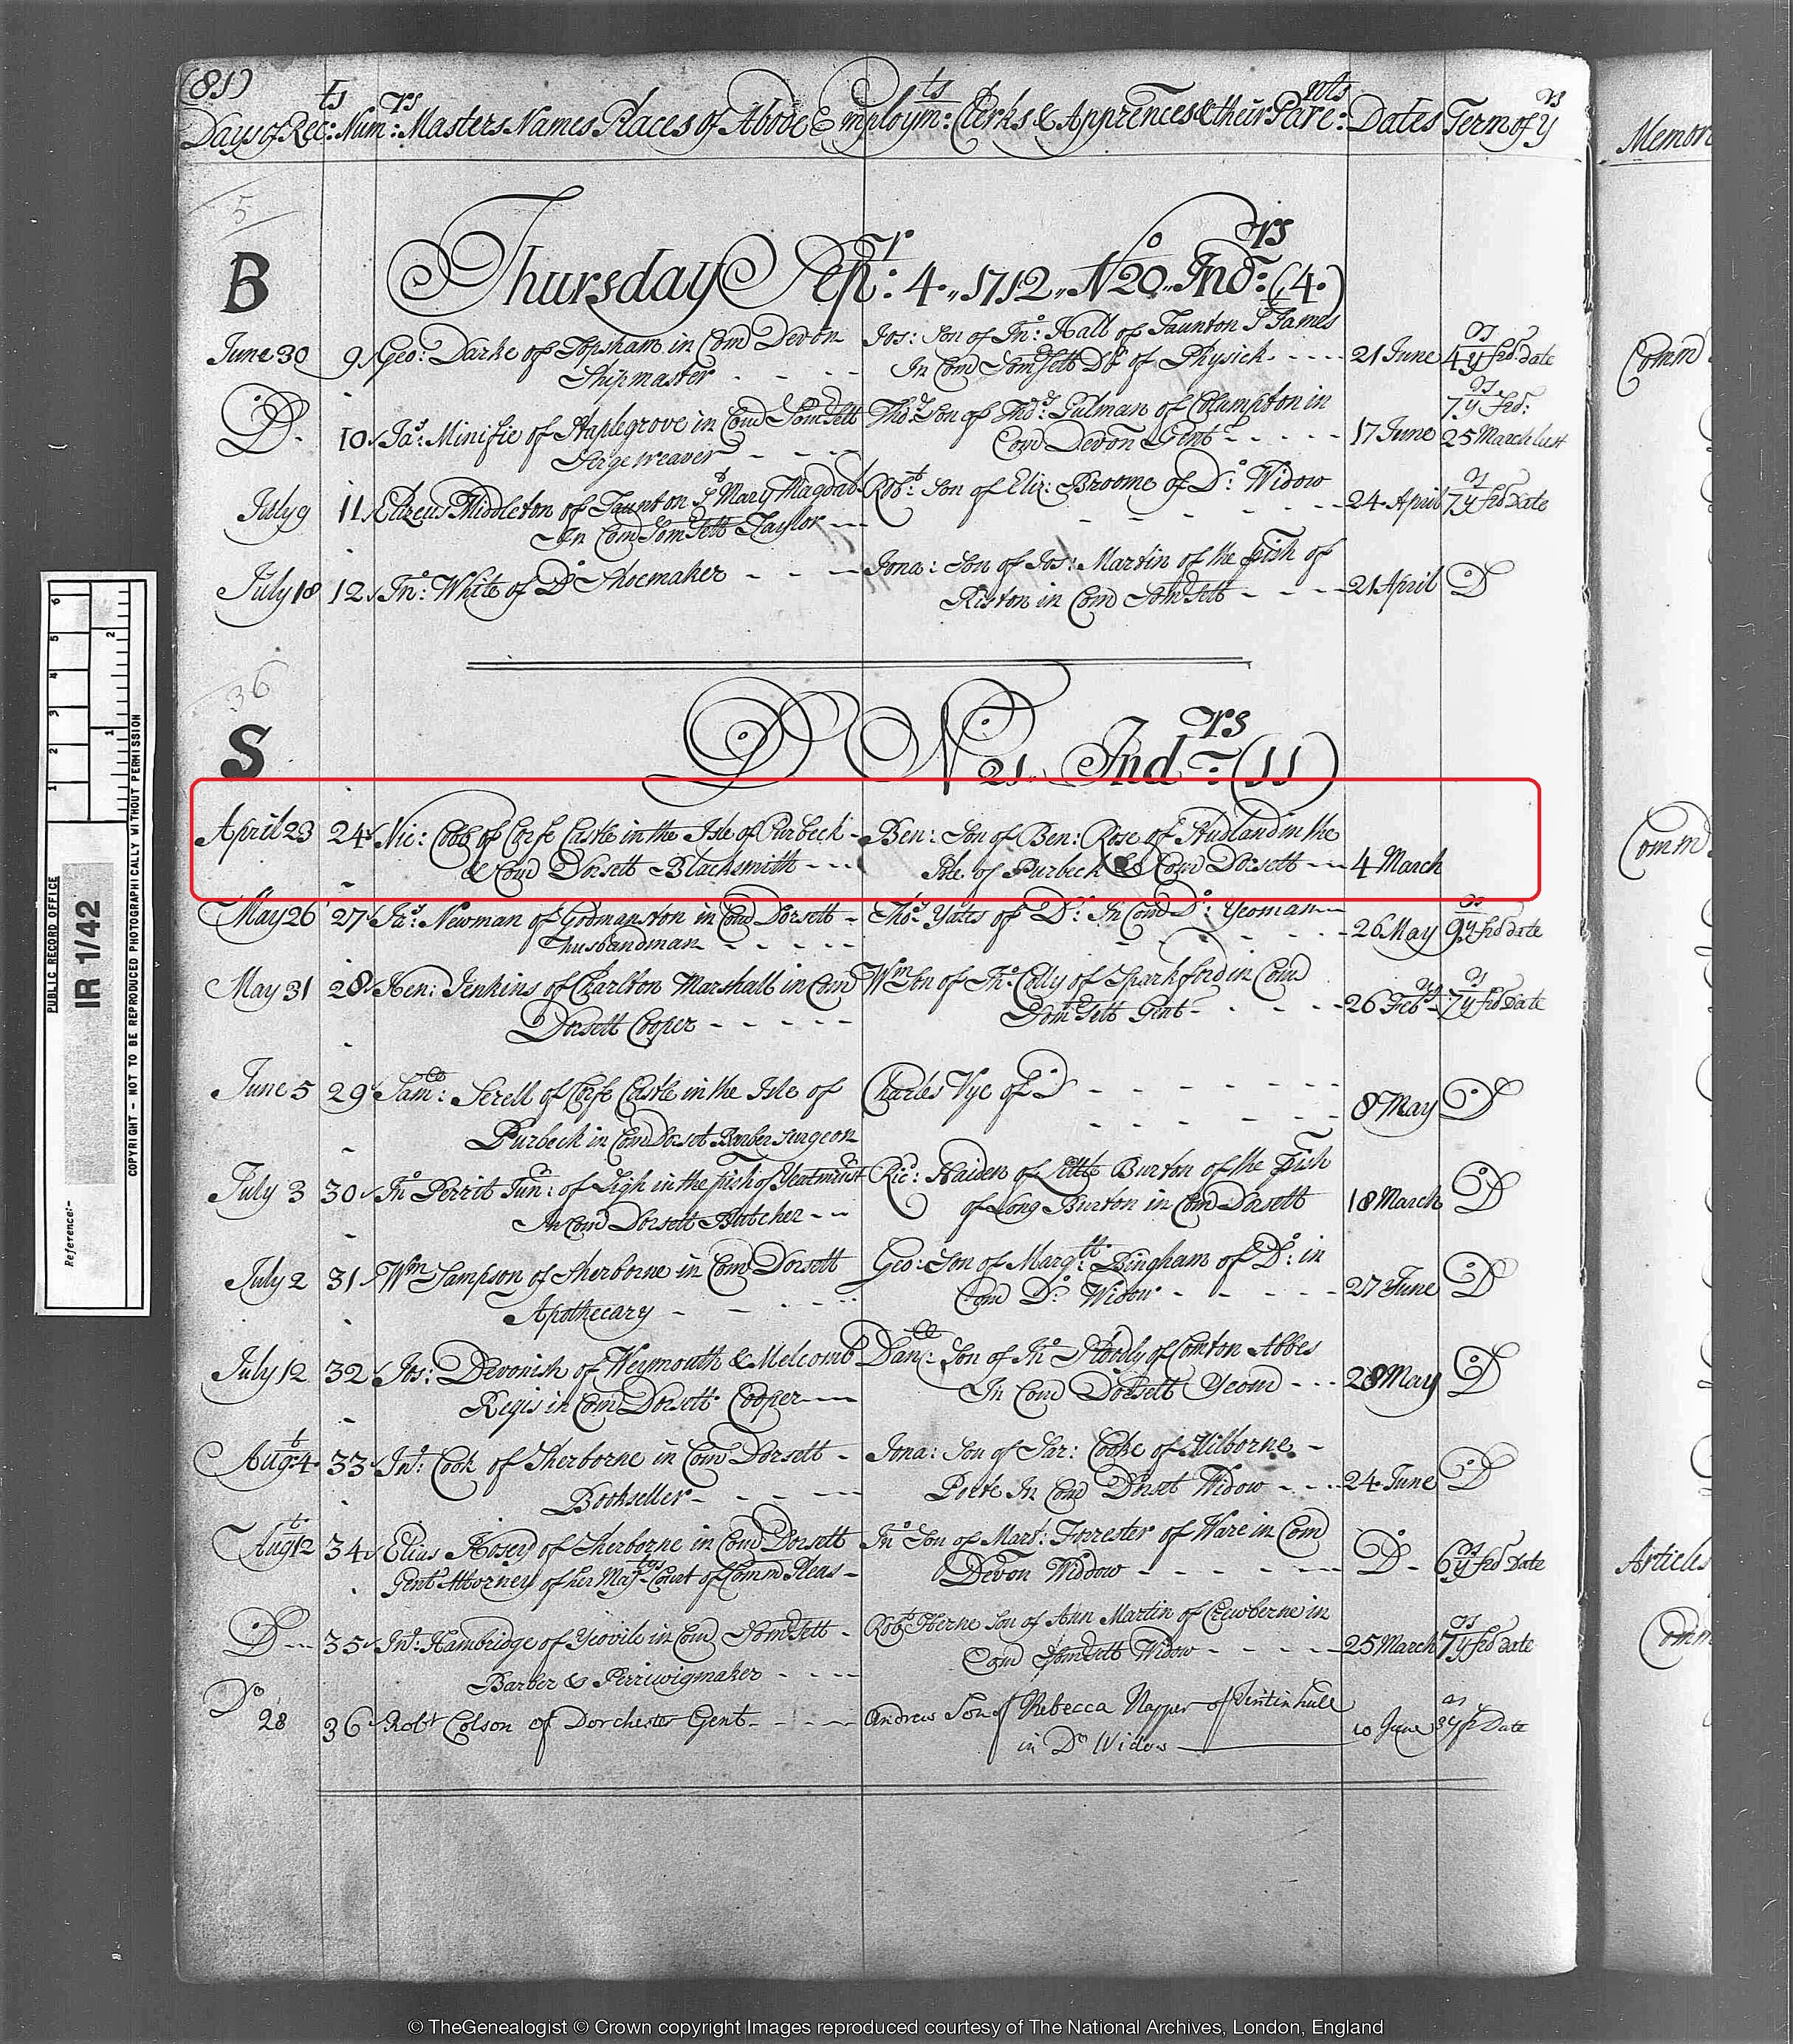 Apprenticeship records from the Occupational Records on TheGenealogist